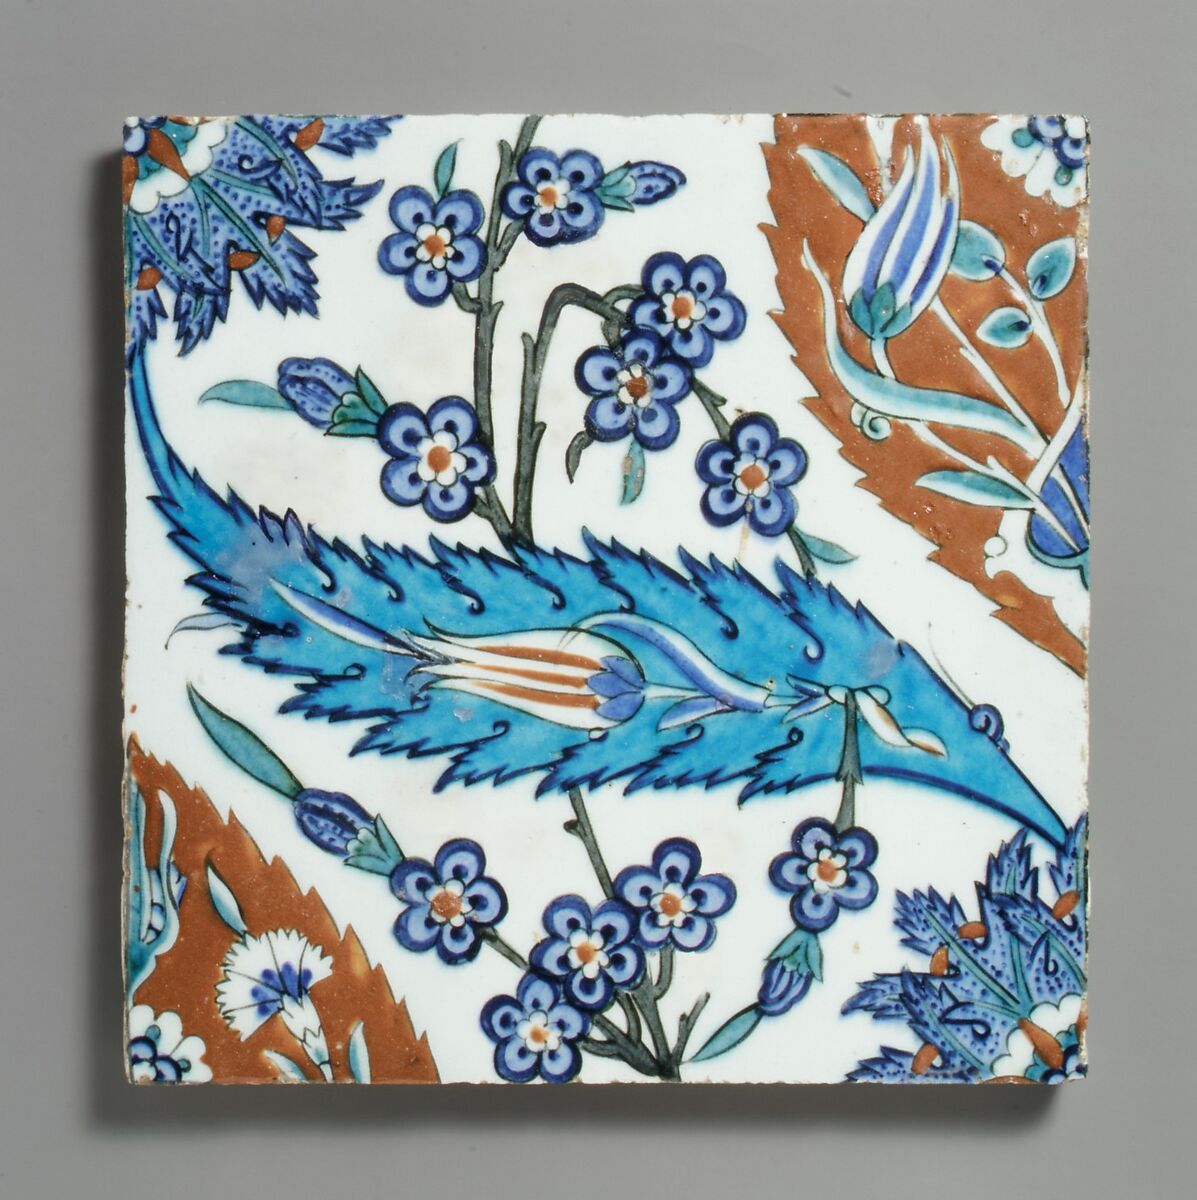 Tile with Saz Leave, Tulips, and Hyacinth Flowers, Stonepaste; polychrome painted under transparent glaze 